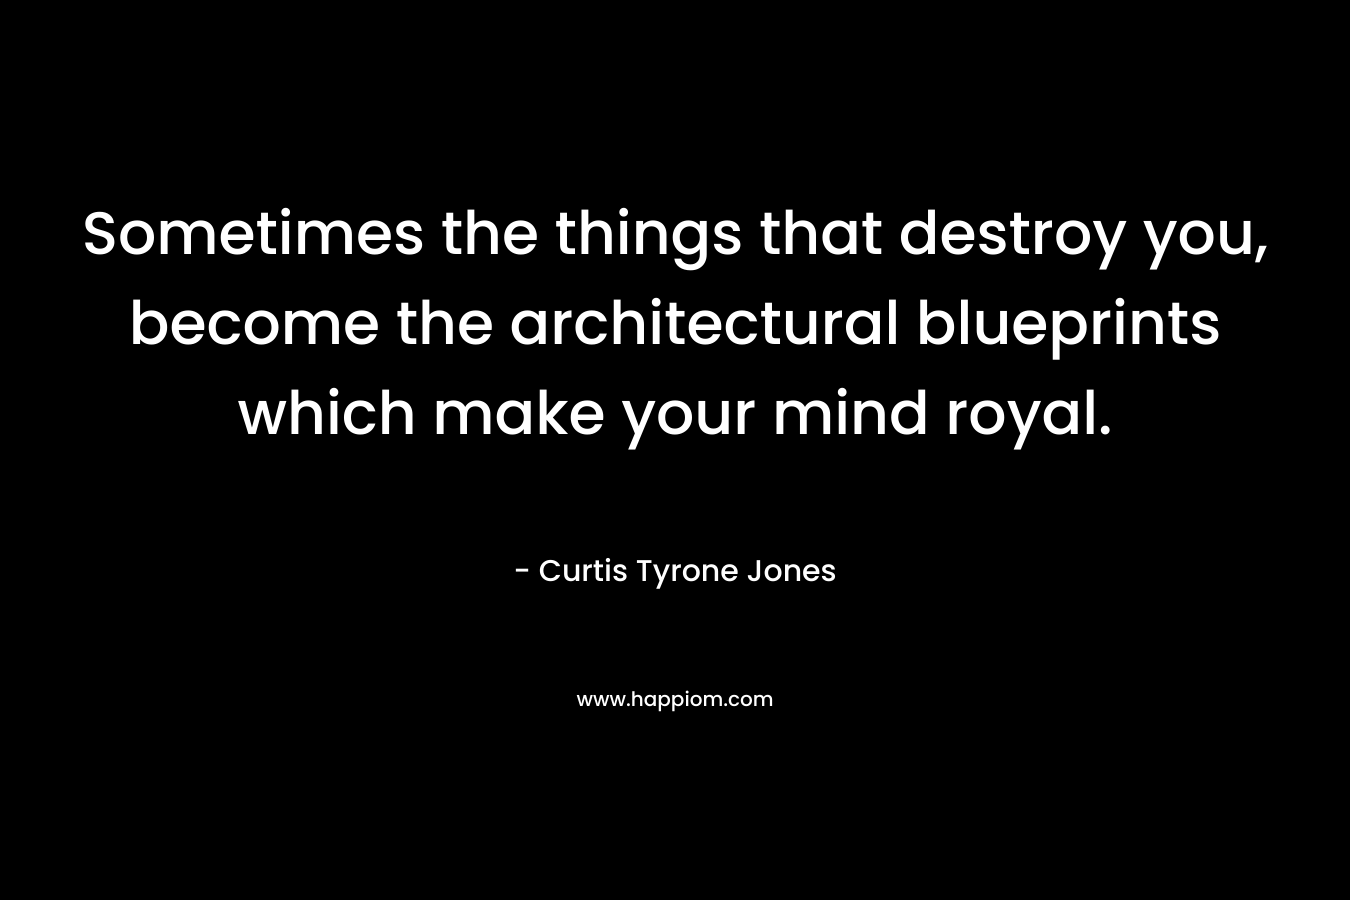 Sometimes the things that destroy you, become the architectural blueprints which make your mind royal.